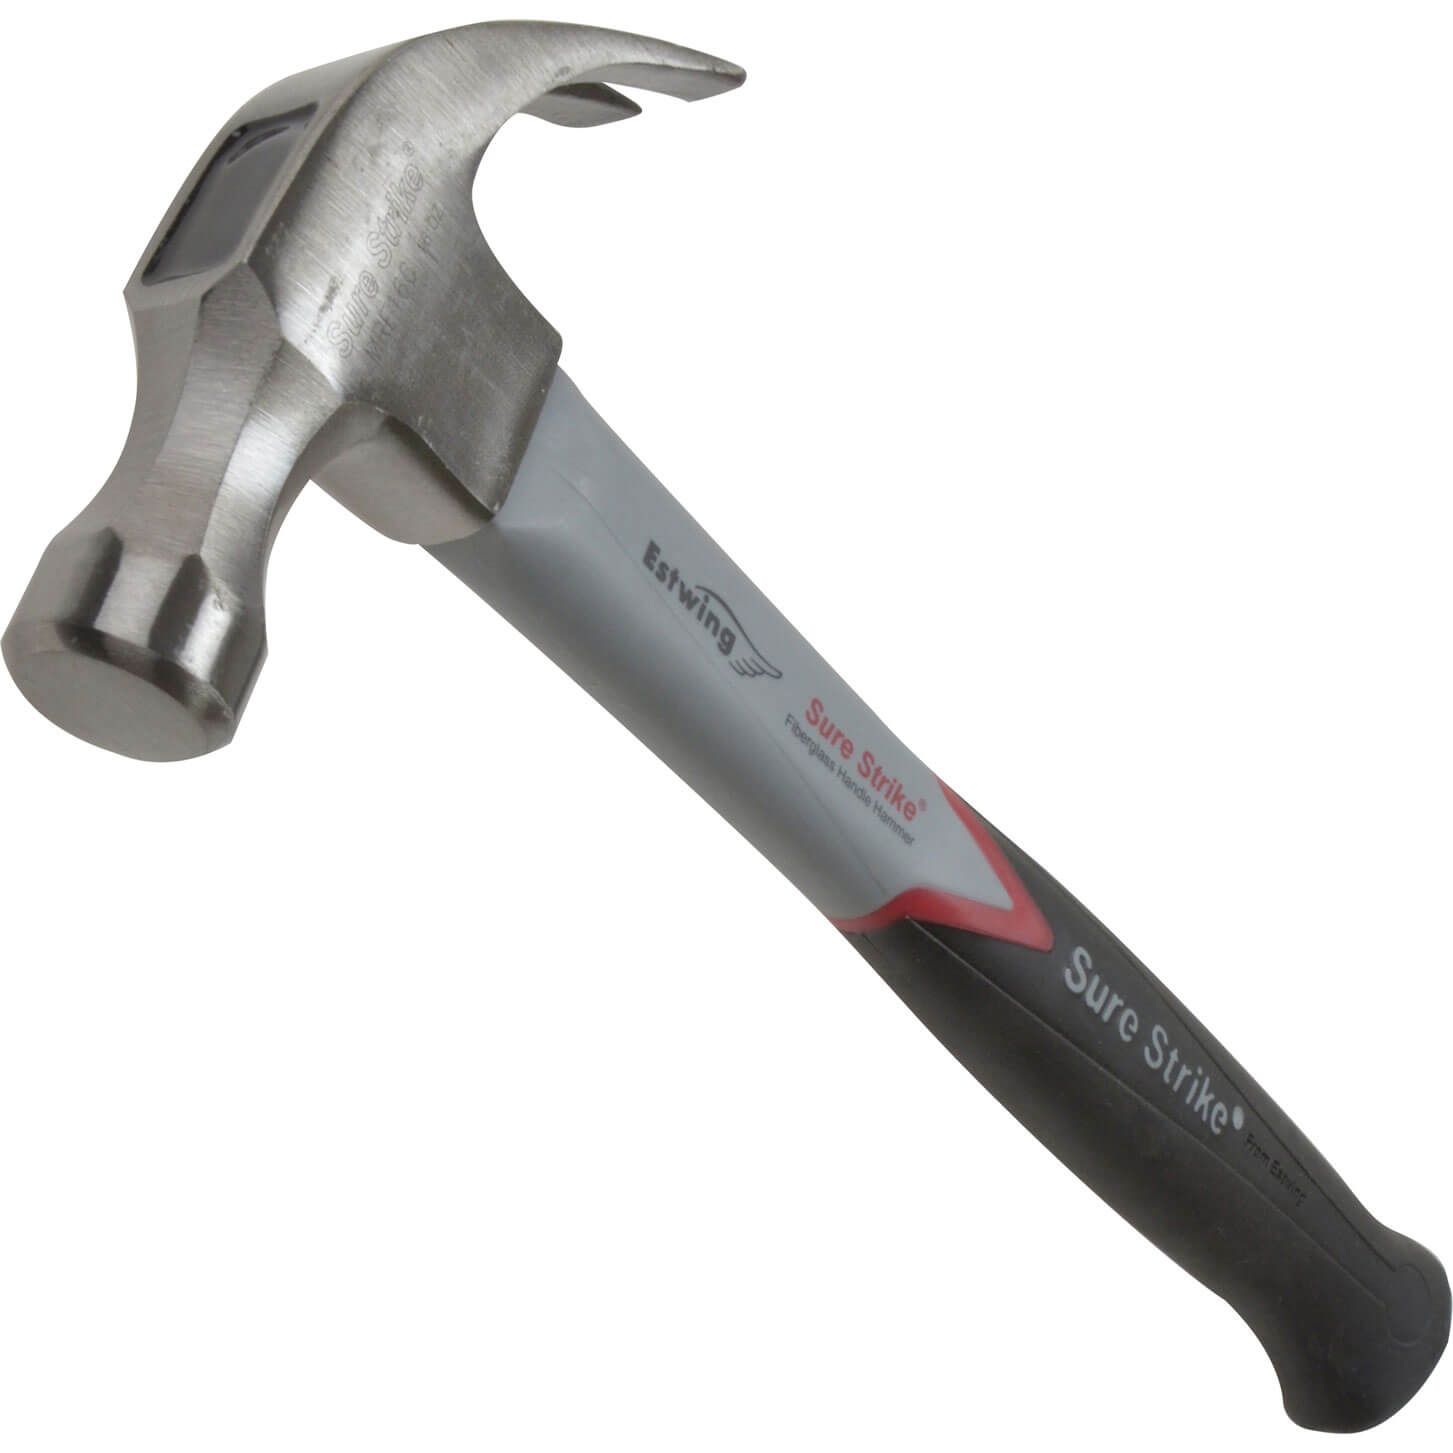 Image of Estwing Surestrike Curved Claw Hammer 450g